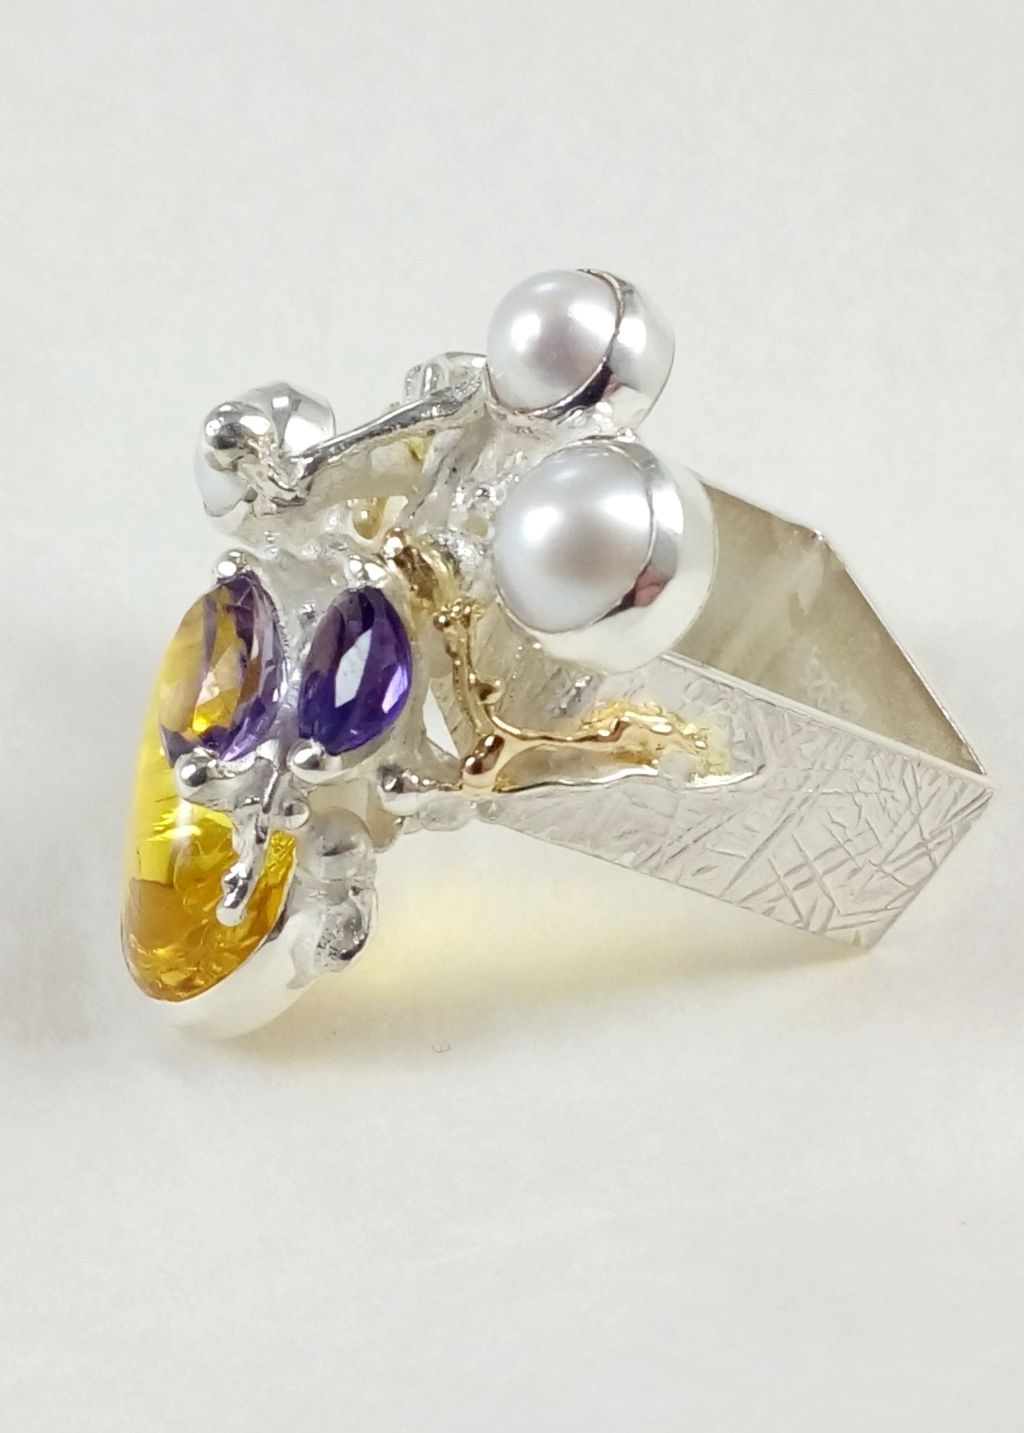 jewelry made from gold and silver, jewelry with color stones, jewelry with real pearls, gregory pyra piro square ring #5631, sculptural jewellery with ocean theme, antique motif inspired ring, sterling silver and 14k gold artisan jewellery, auction house with contemporary jewellery, color gemstone jewelry made by artist, what is the difference between artisan jewellery and fine jewellery and is it possible to have both, how to bid on auctions with collectibles and fine jewellery, shop for fine craft and collectibles, gregory pyra piro art jewelry, where to buy gregory pyra piro jewellery right now, rings for women with two amethysts and pearl, jewellery with amber and amethysts, fine craft gallery handcrafted ring for sale, sterling silver and 14 karat gold ring